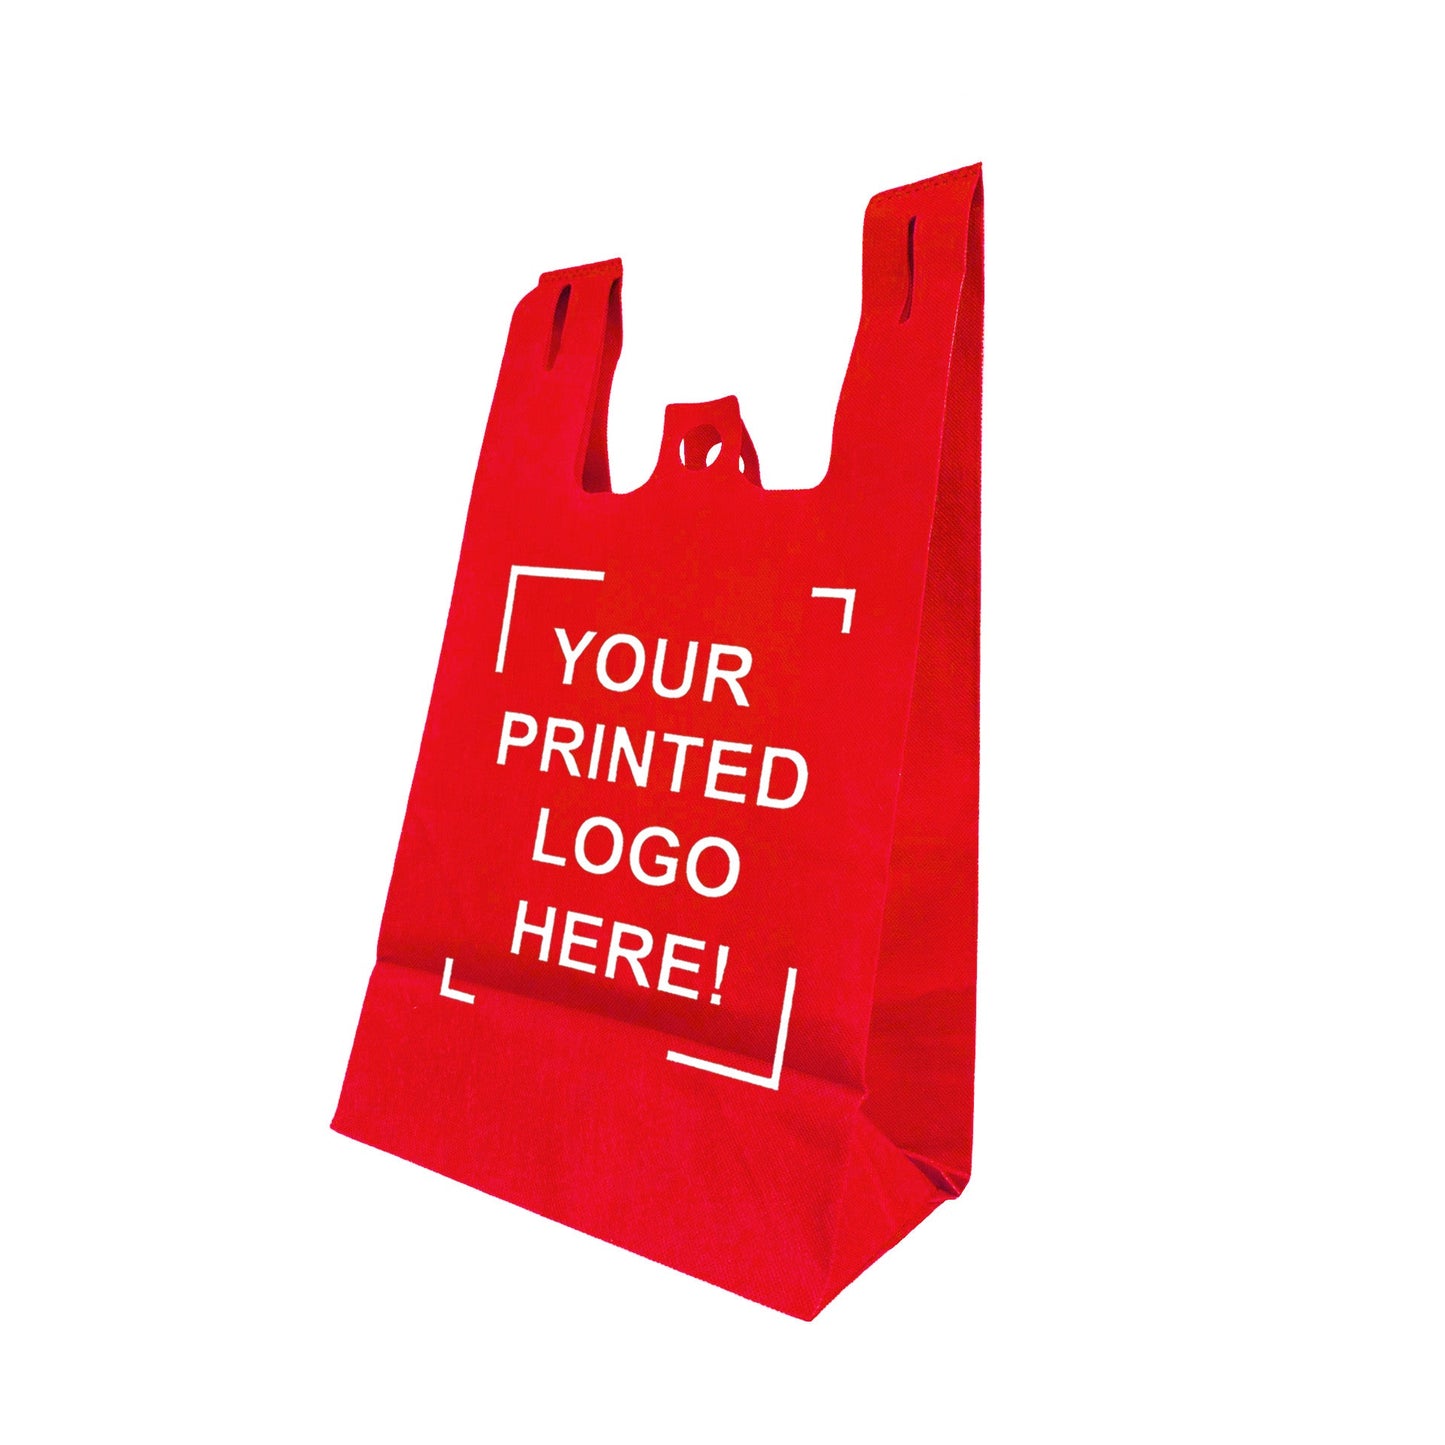 200pcs, Non-Woven Reusable T-Shirt Bag 12x7x22x7 inches Red Shopping Bags Square Bottom, One Color Custom Print, Printed in Canada